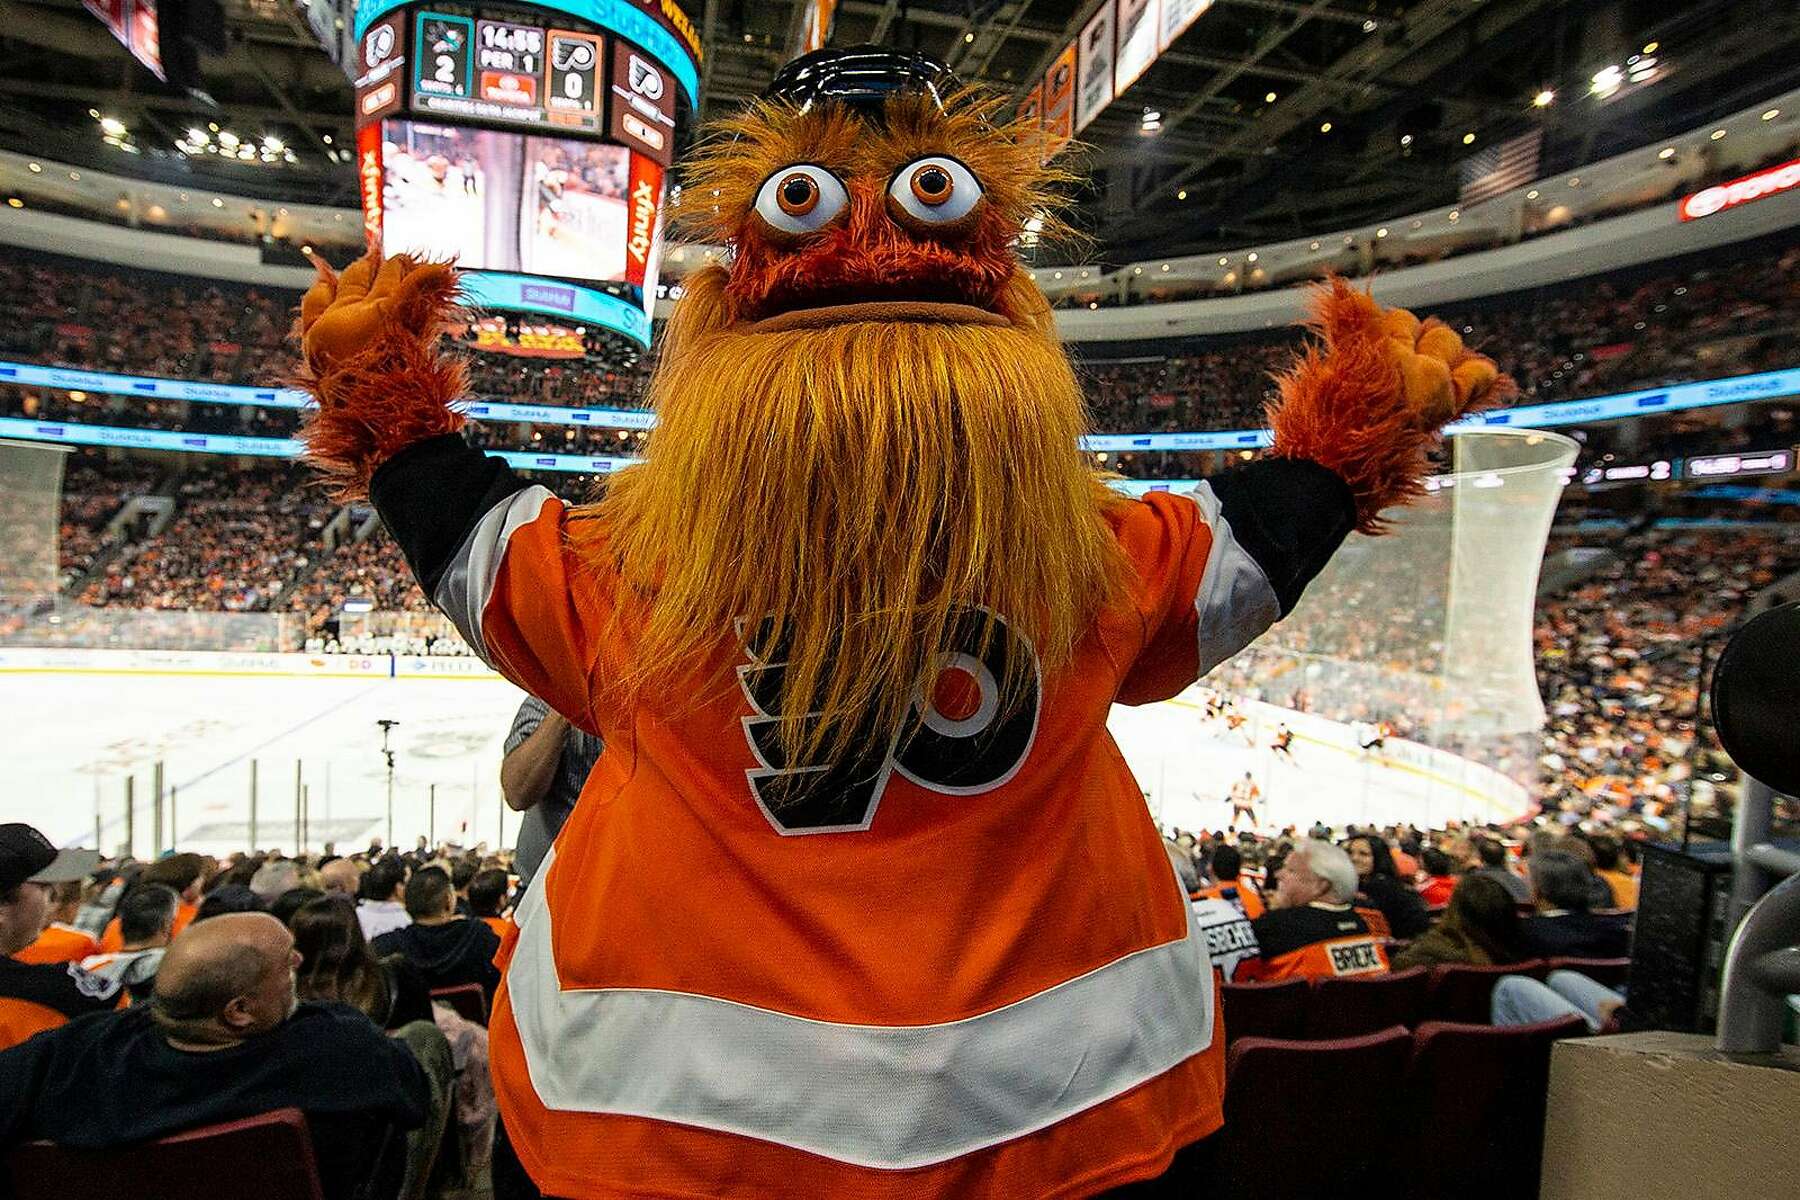 How the Flyers rolled out a deranged orange mascot — and captivated a city:  'When everything is bad in the world, Gritty is good